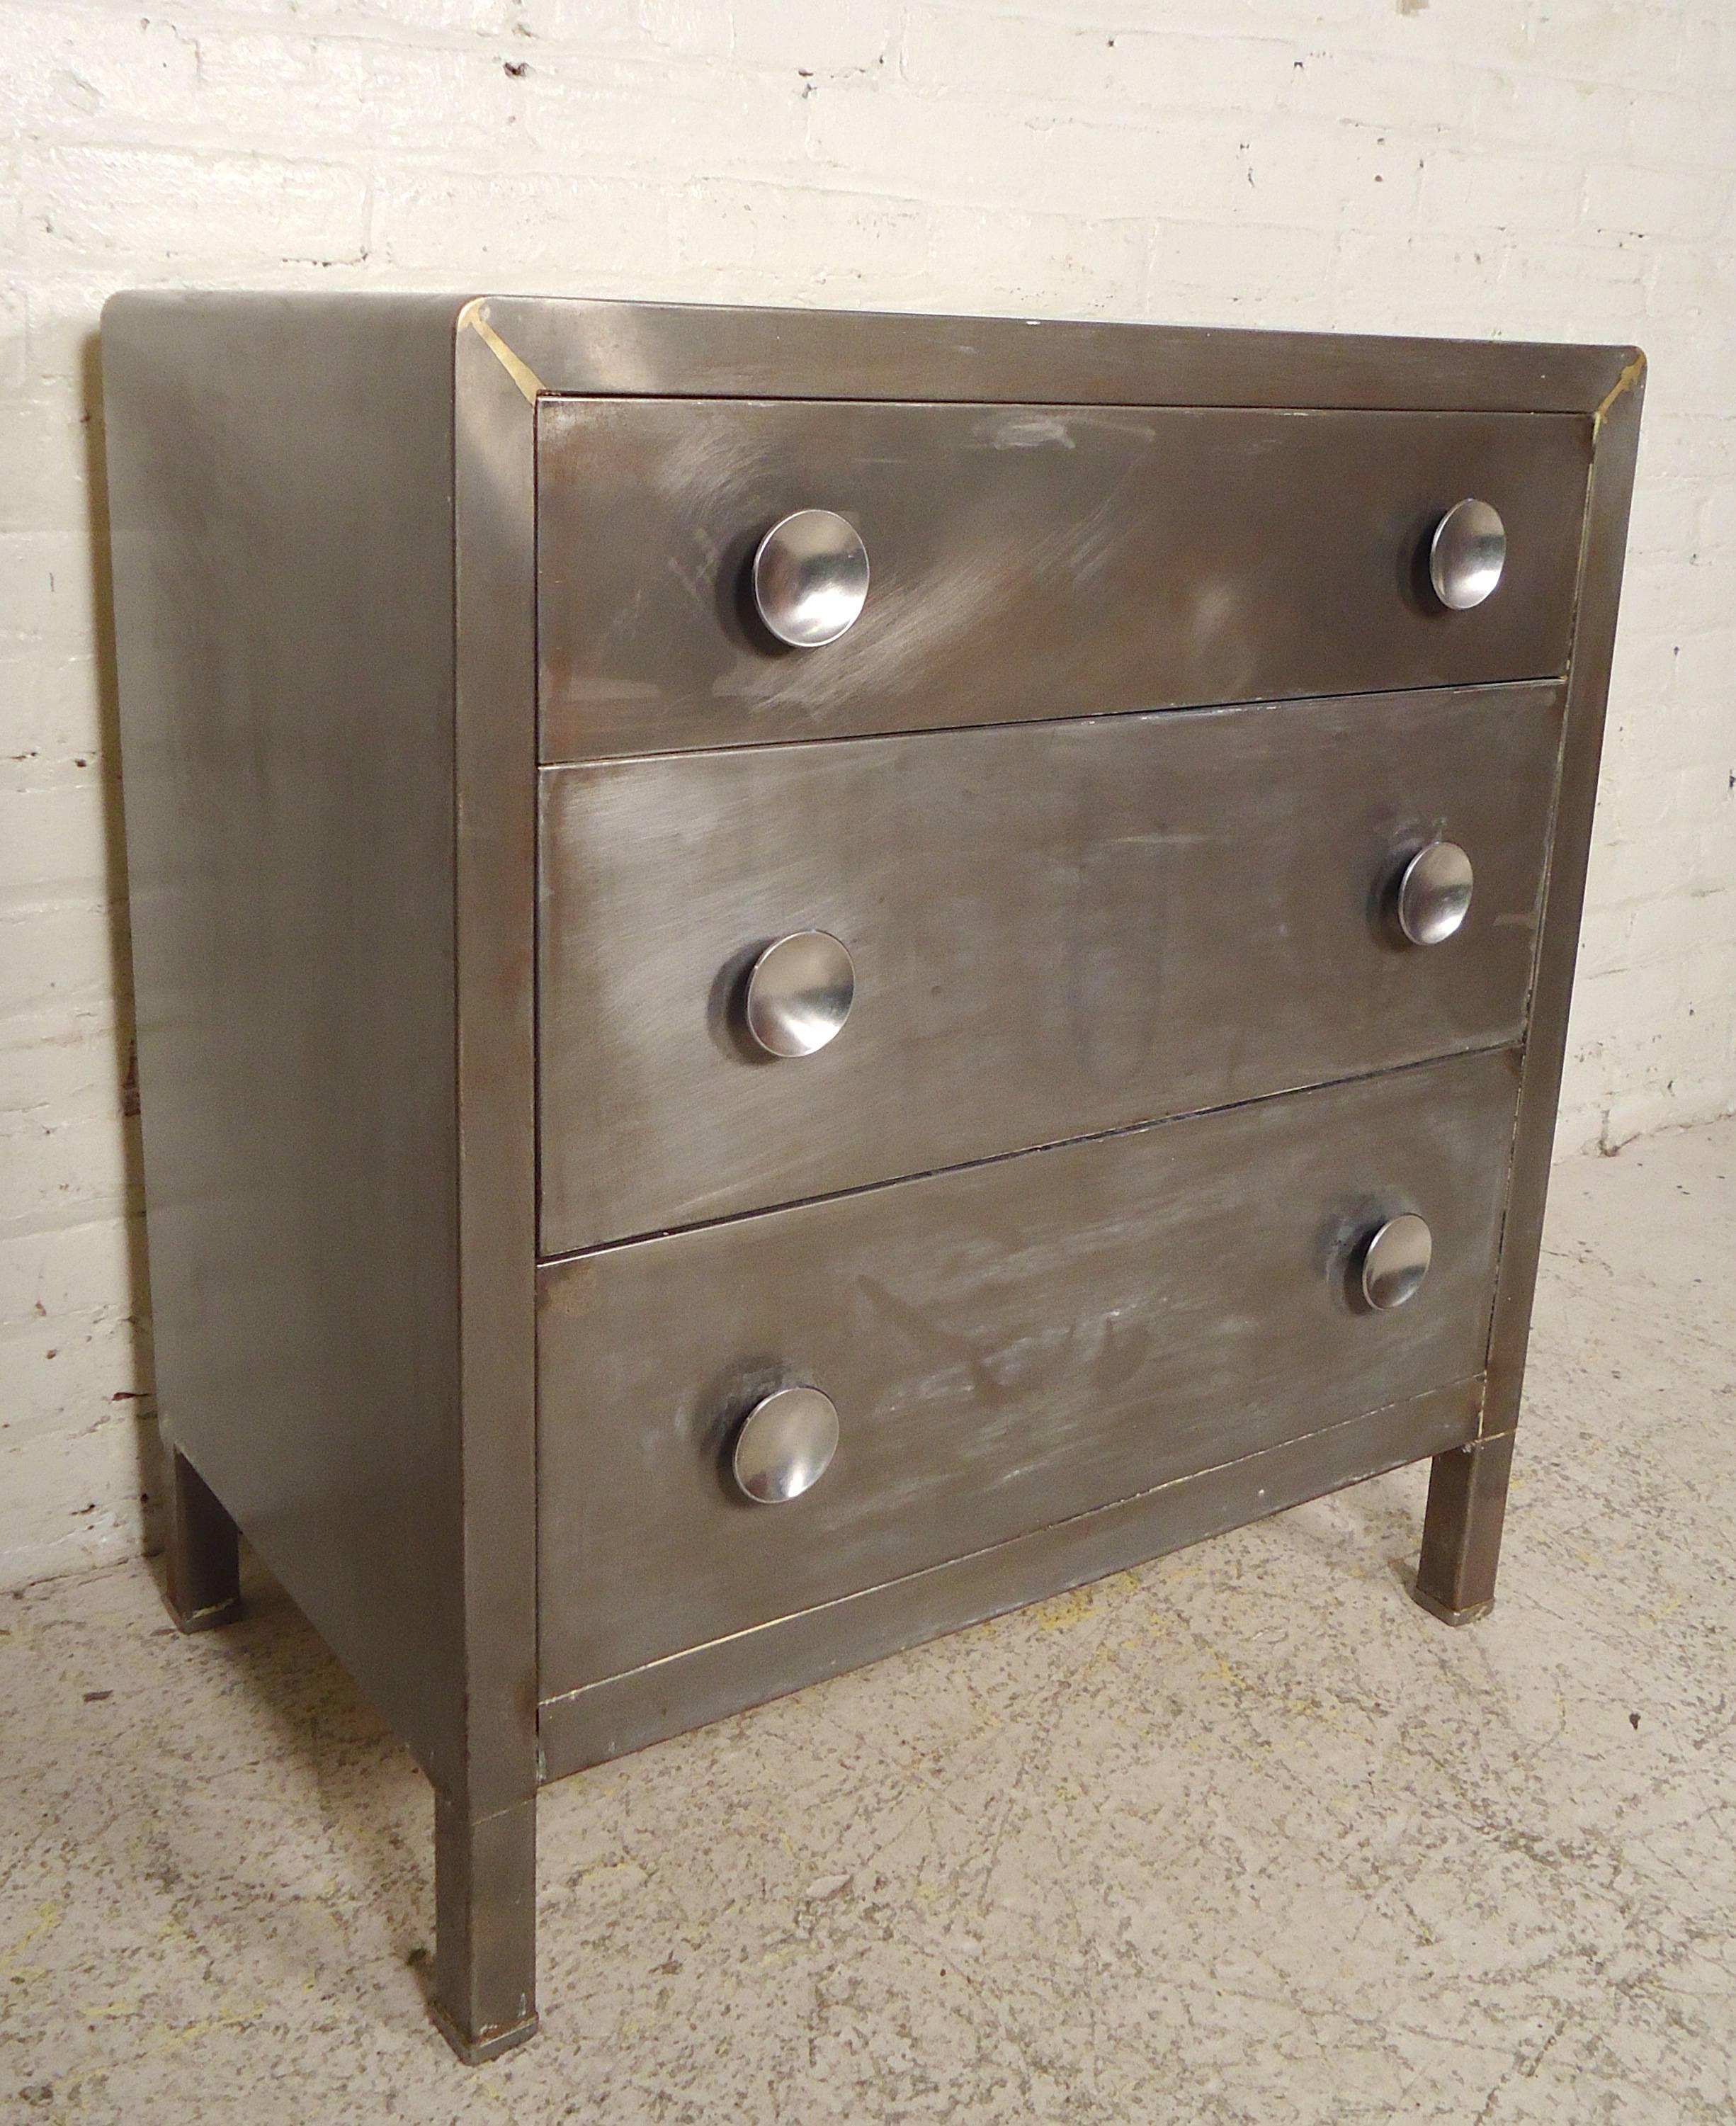 Norman Bel Geddes designed dresser made by Simmons Furniture. All metal, restored in a bare metal finish style. Three wide drawers with large round pulls.

(Please confirm item location NY or NJ with dealer).
 